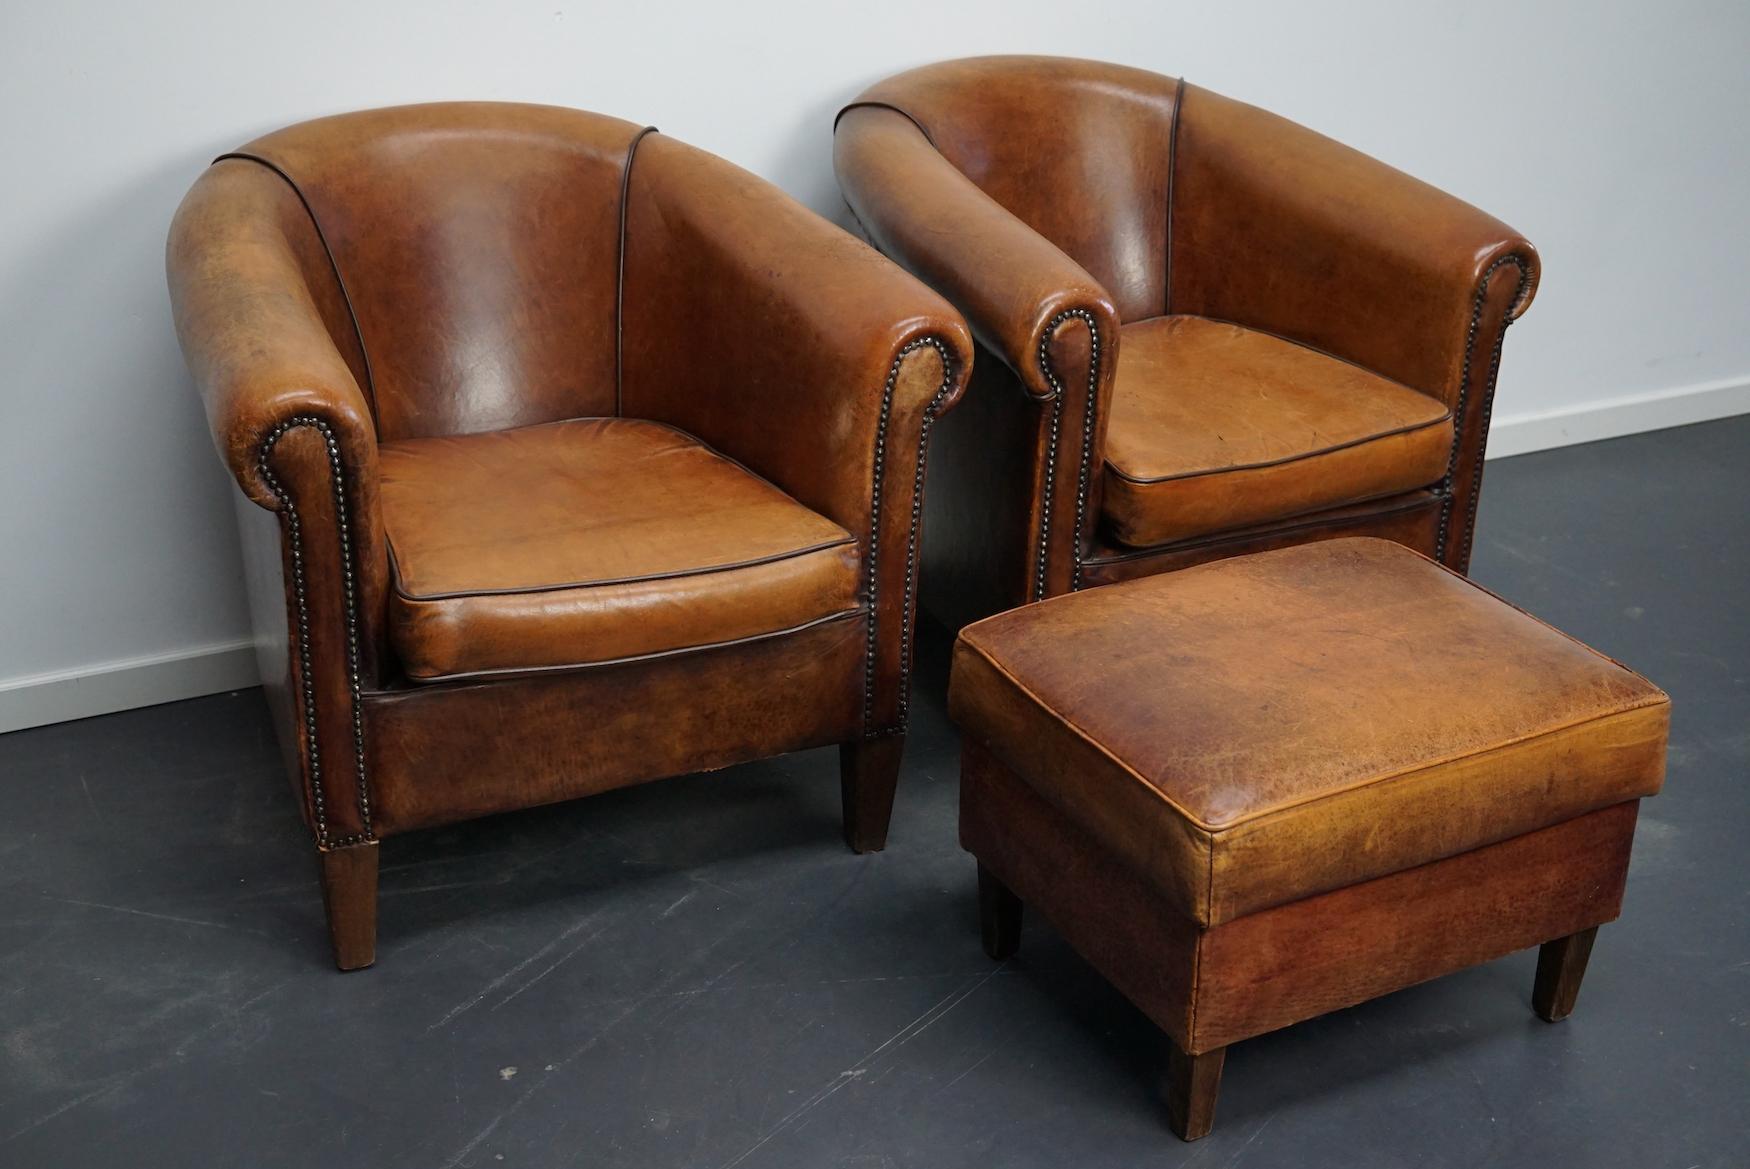 vintage leather chair and footstool